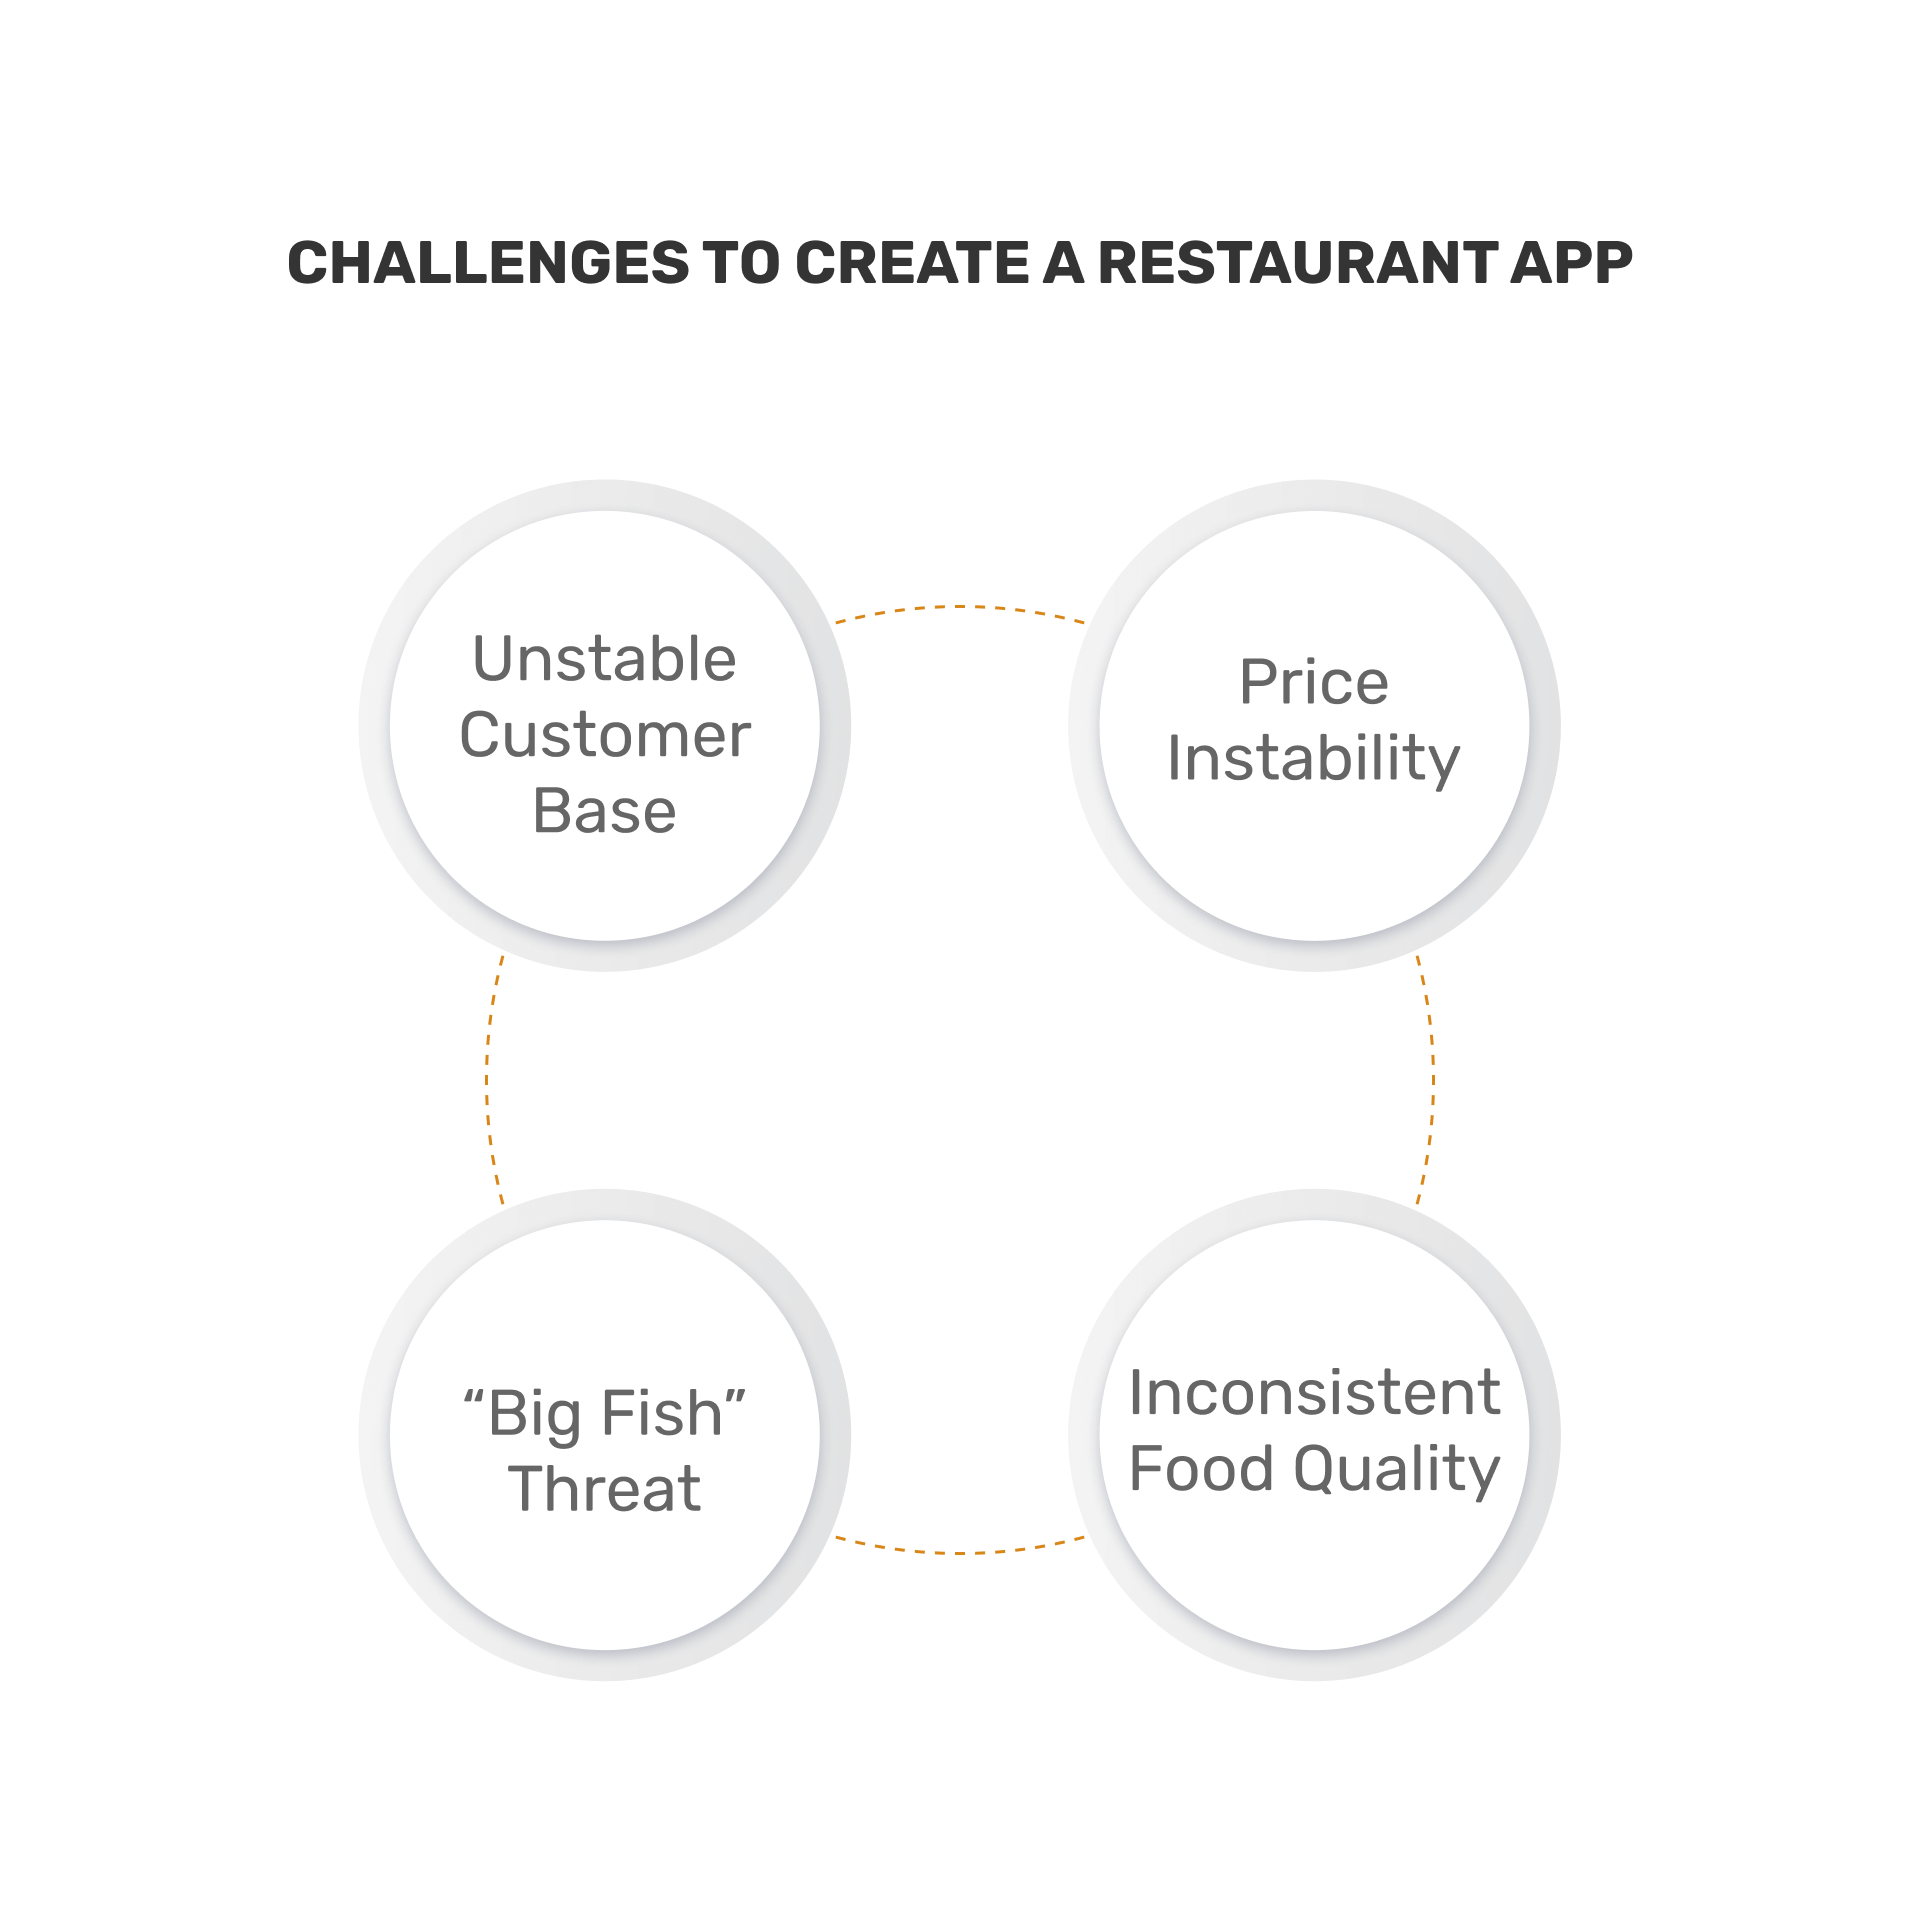 See what type of challenges and obstacles you may face when creating and launching a restaurant application.